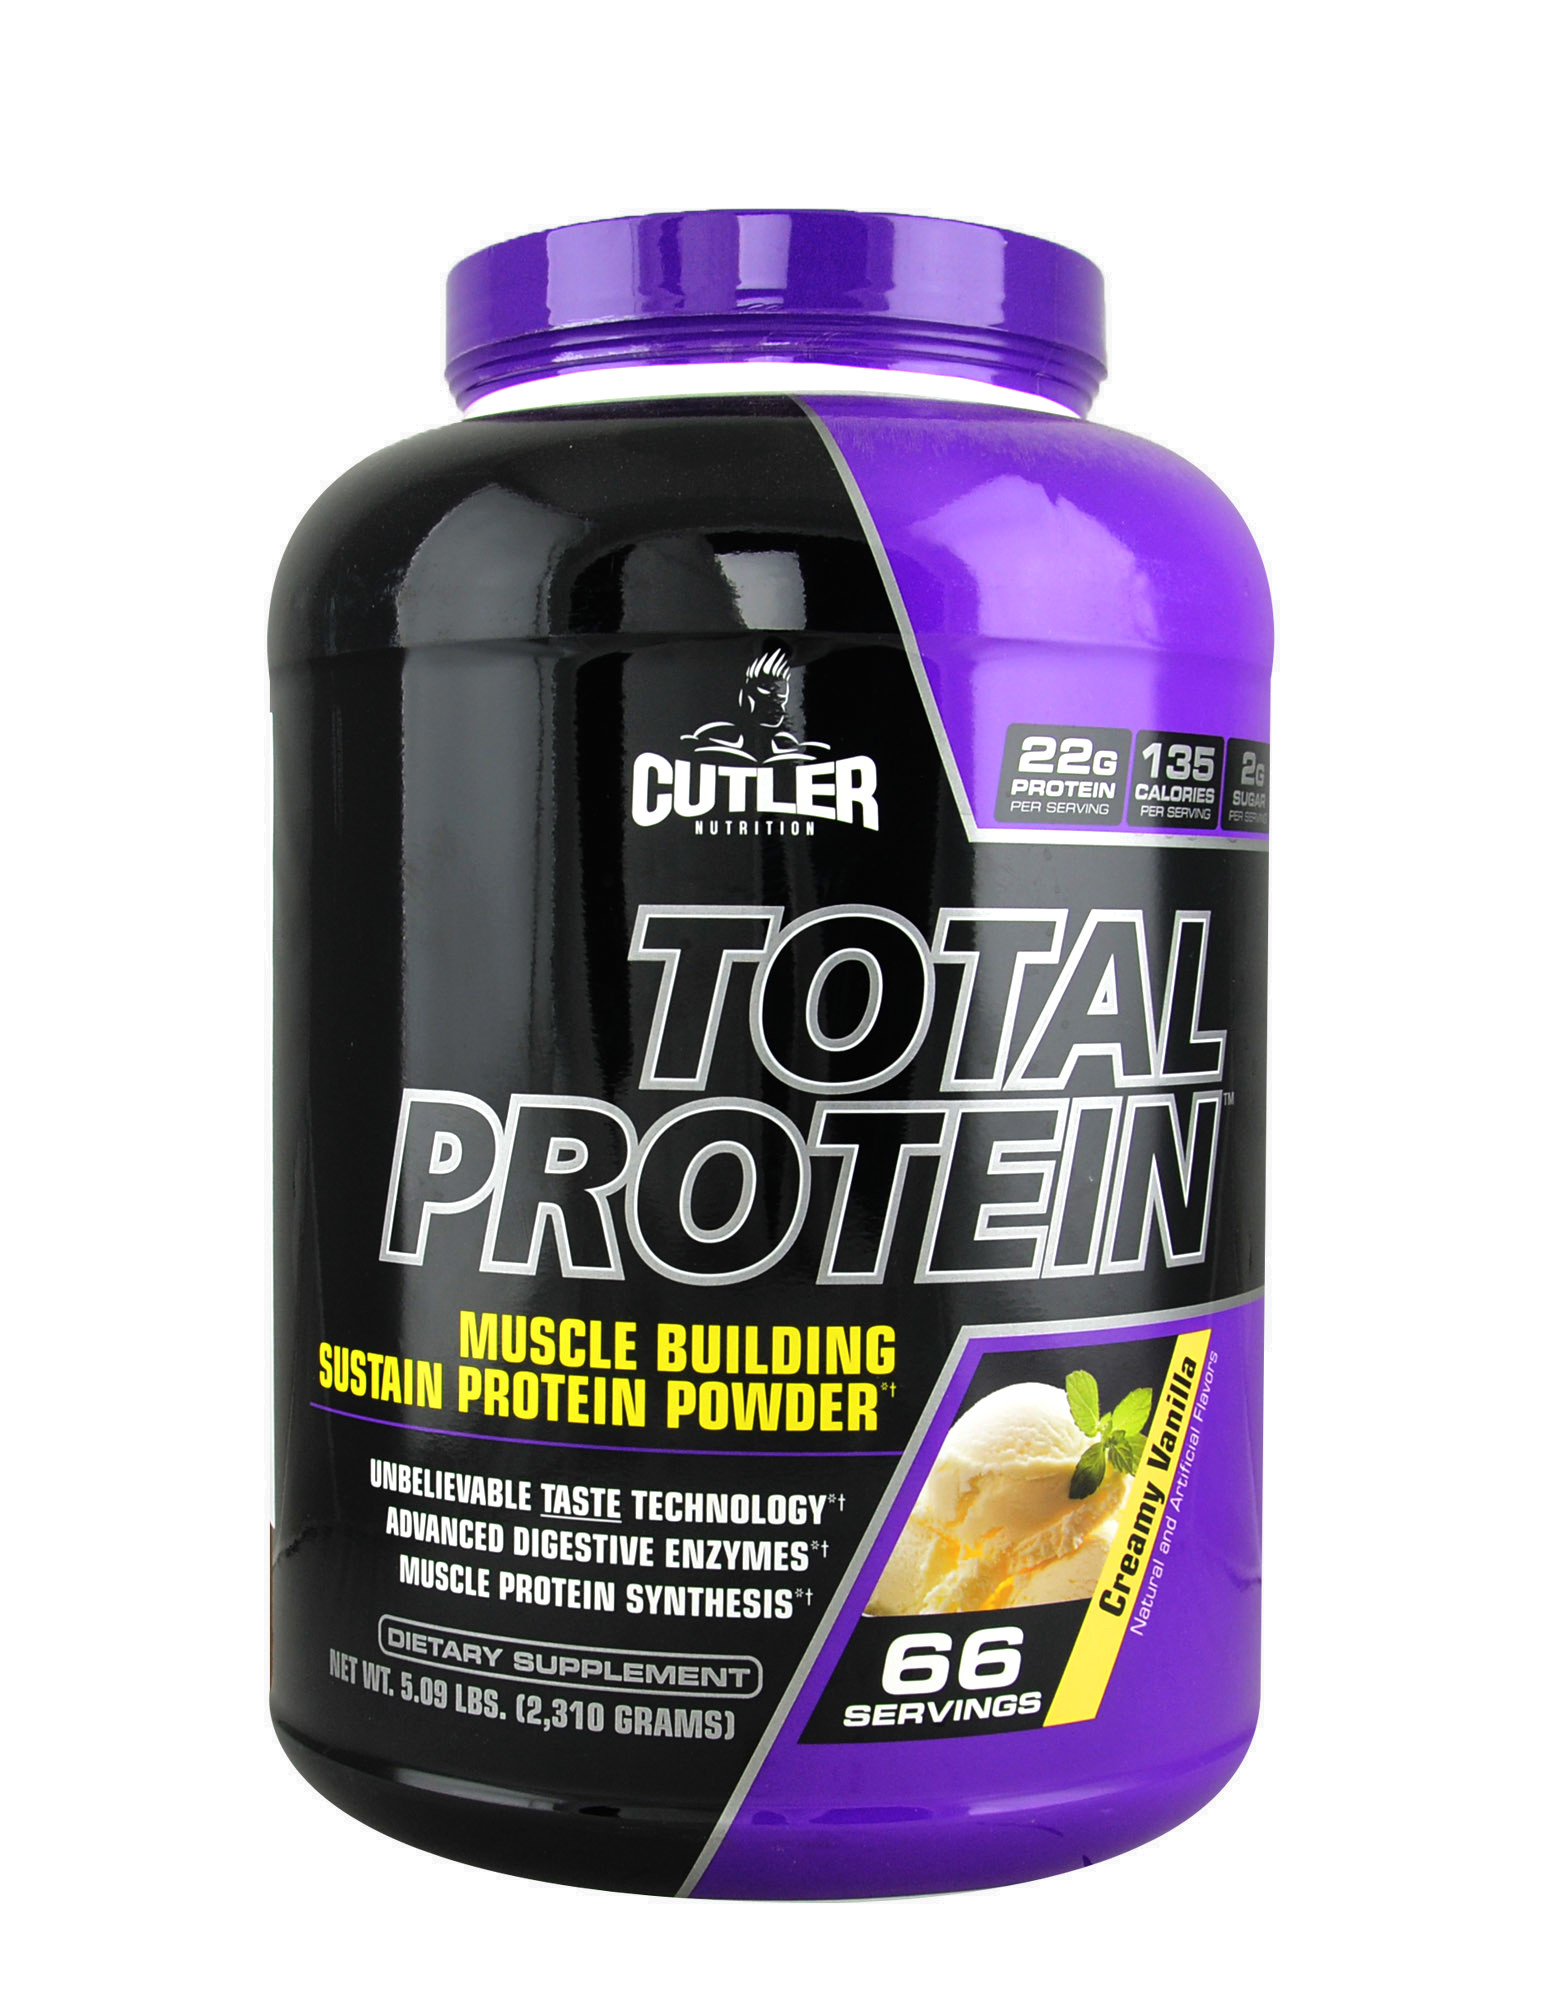 Total Protein by Cutler nutrition, 2310 grams 